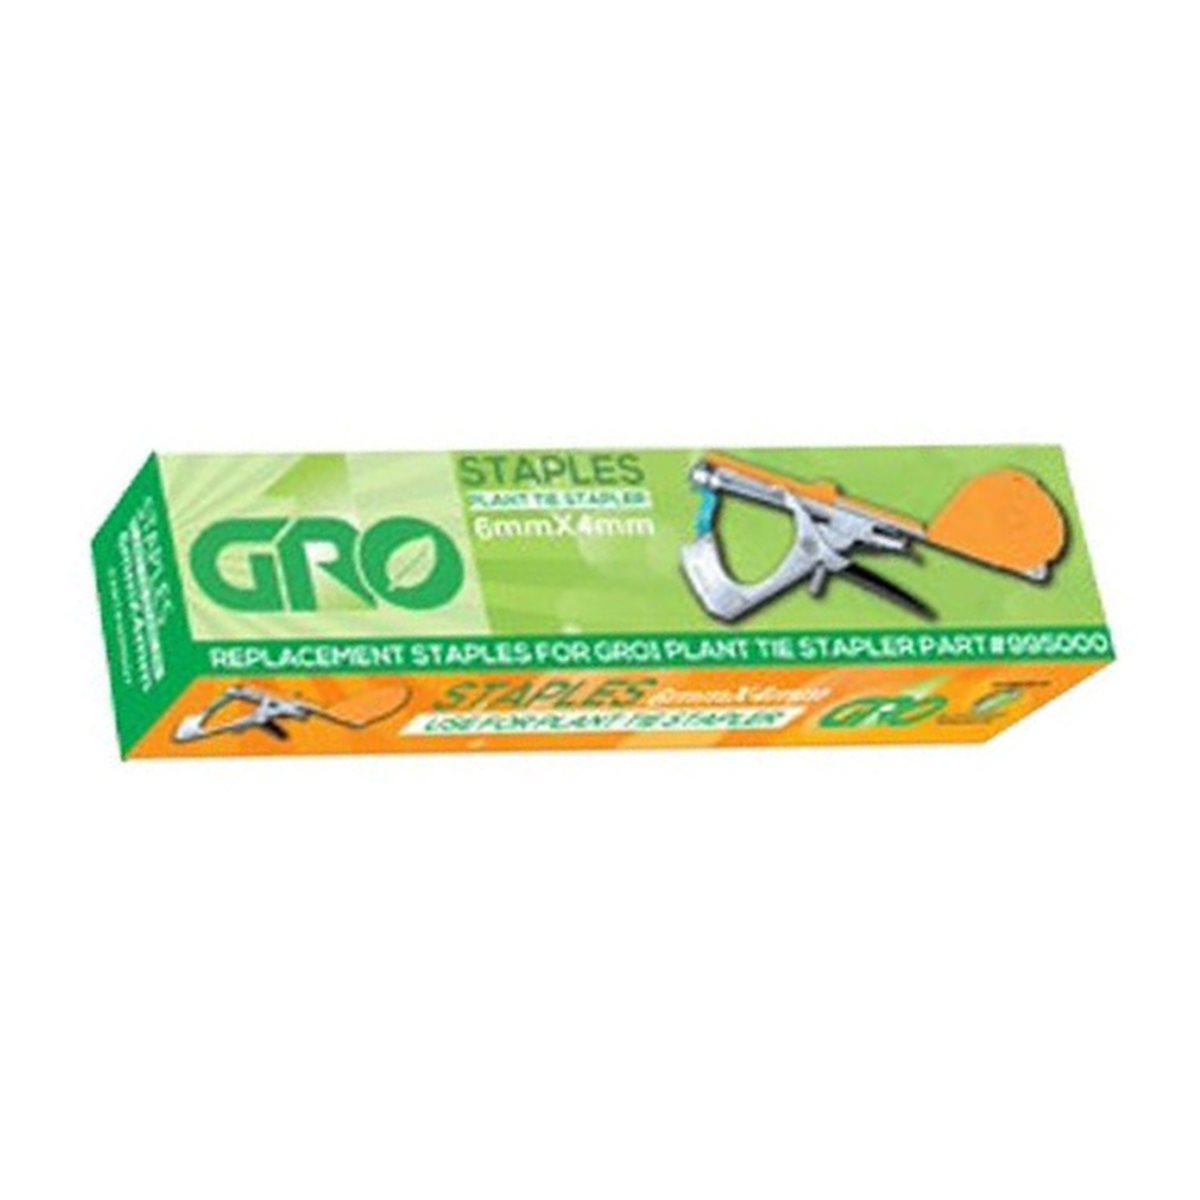 Product Image:Gro1 Replacement Staples for Tape Gun